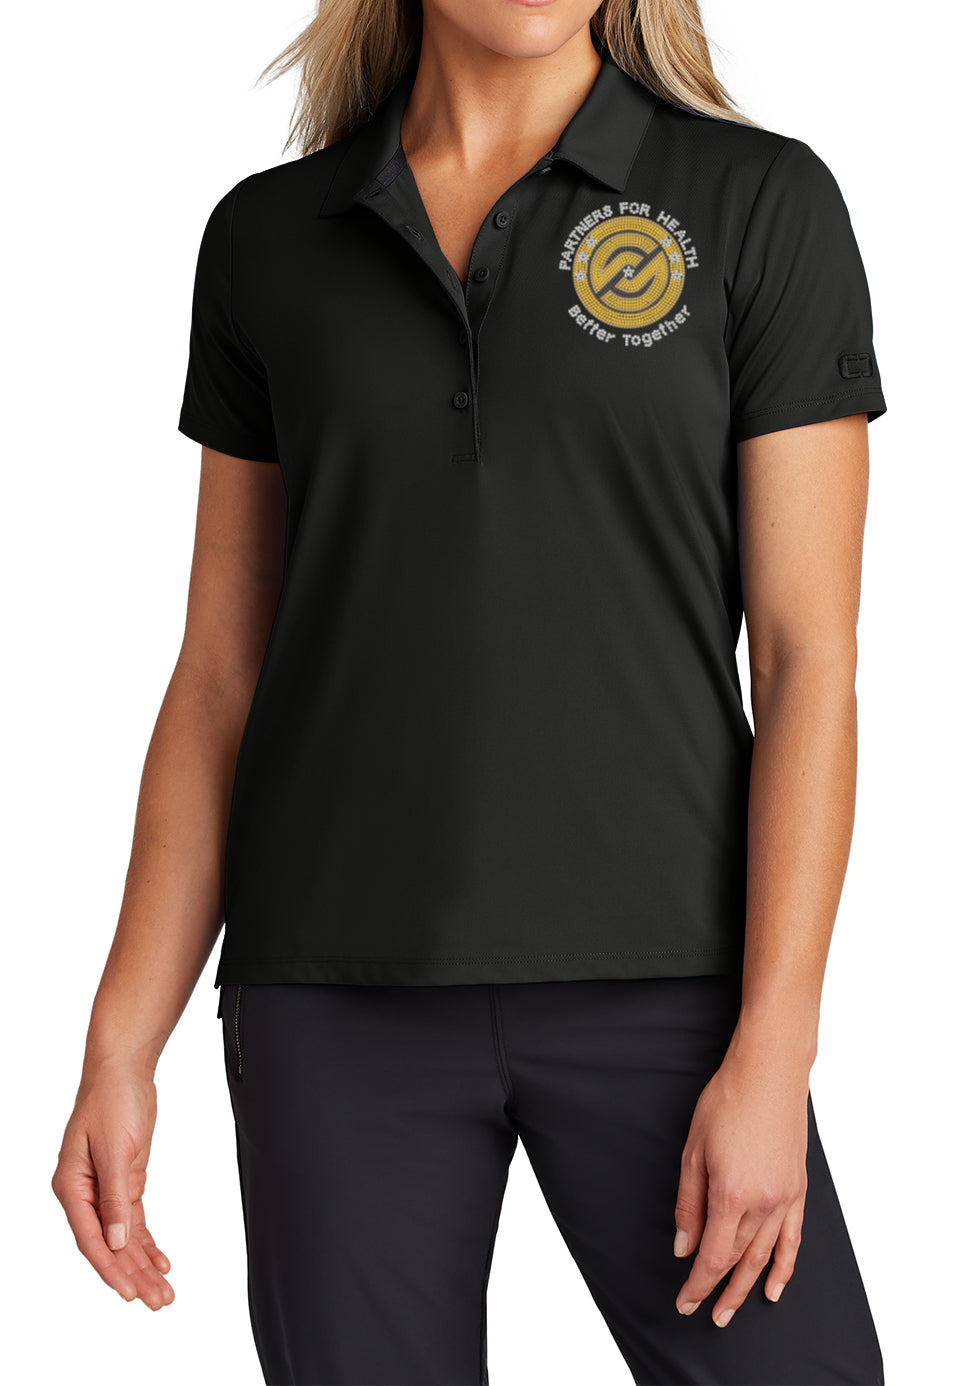 Partners For Health | Bev Vance Level Up Collection | BLING Business Professional Short Sleeve Polo